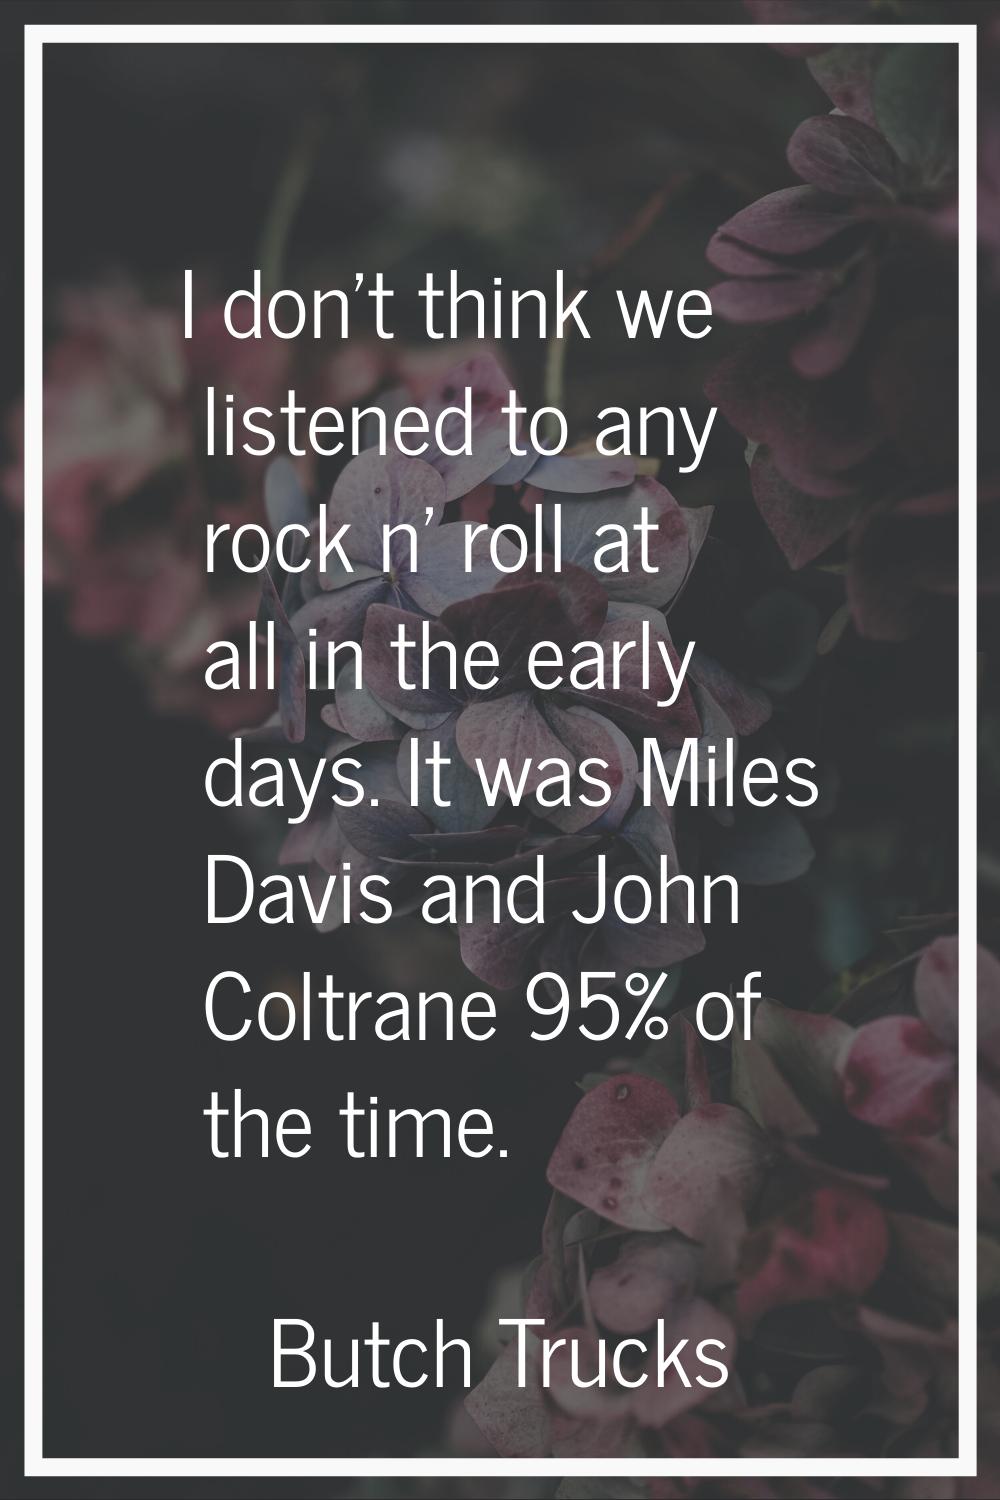 I don't think we listened to any rock n' roll at all in the early days. It was Miles Davis and John